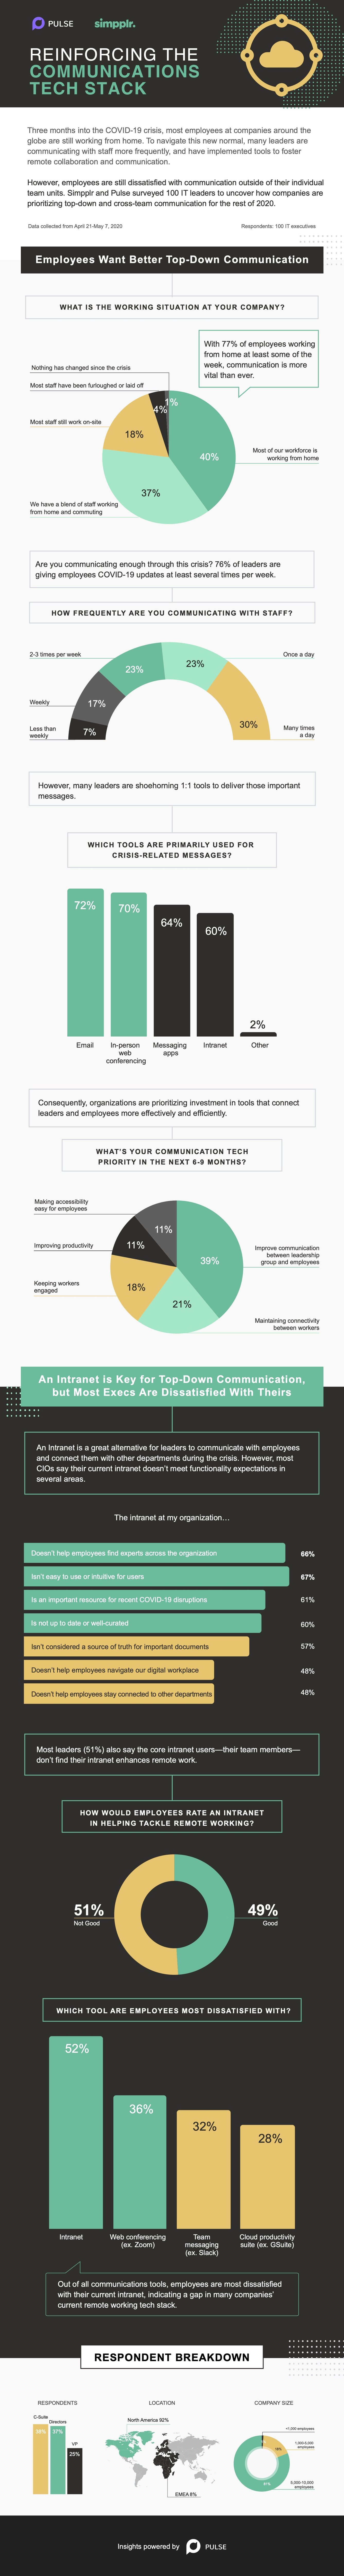 Infographic of 2020 Internal Communication Trends with a Remote Workforce